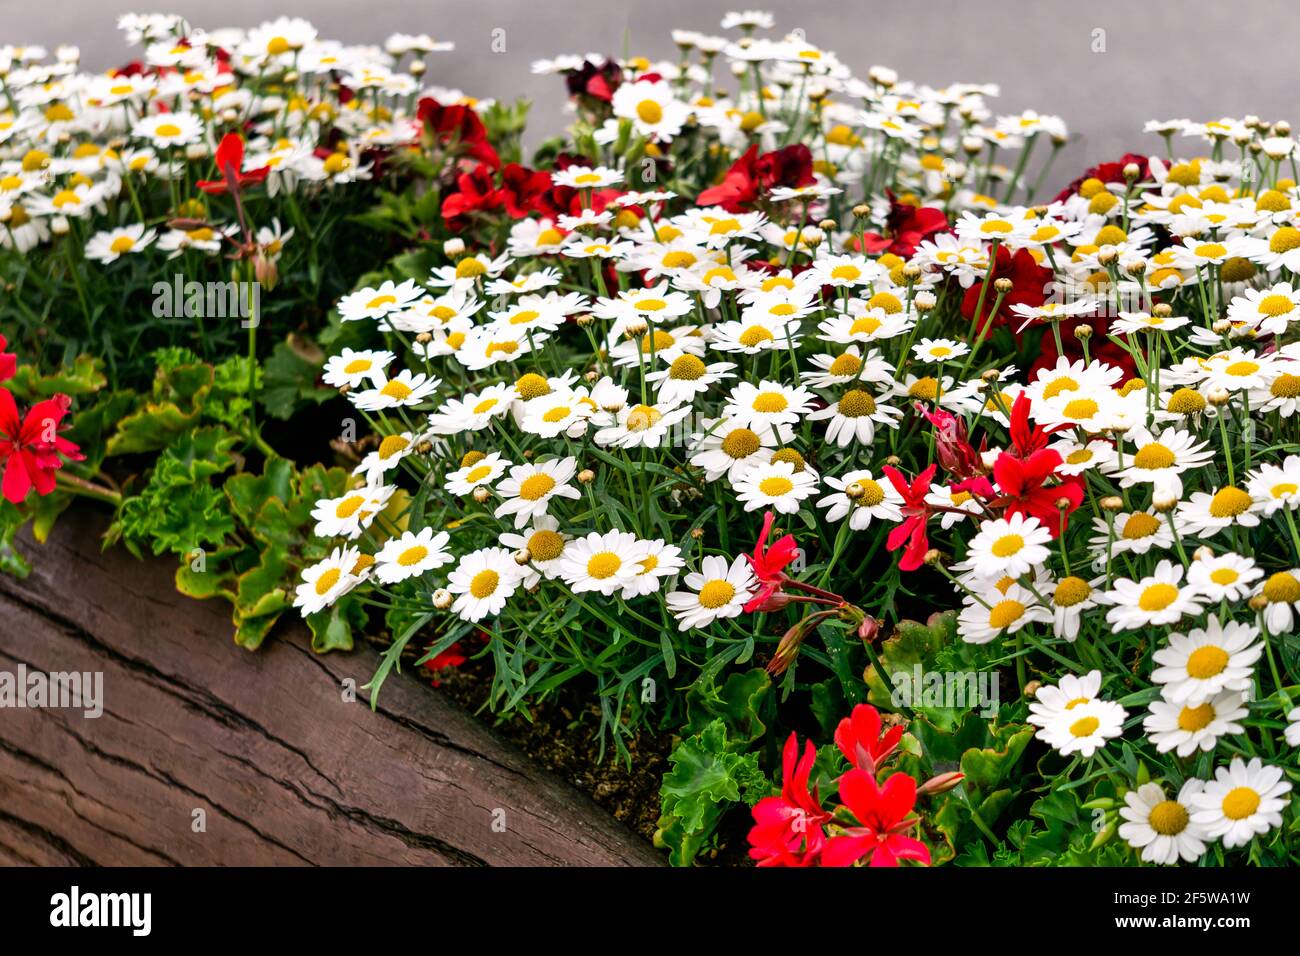 White daisies together with red geraniums are planted in a wooden tub. Stock Photo